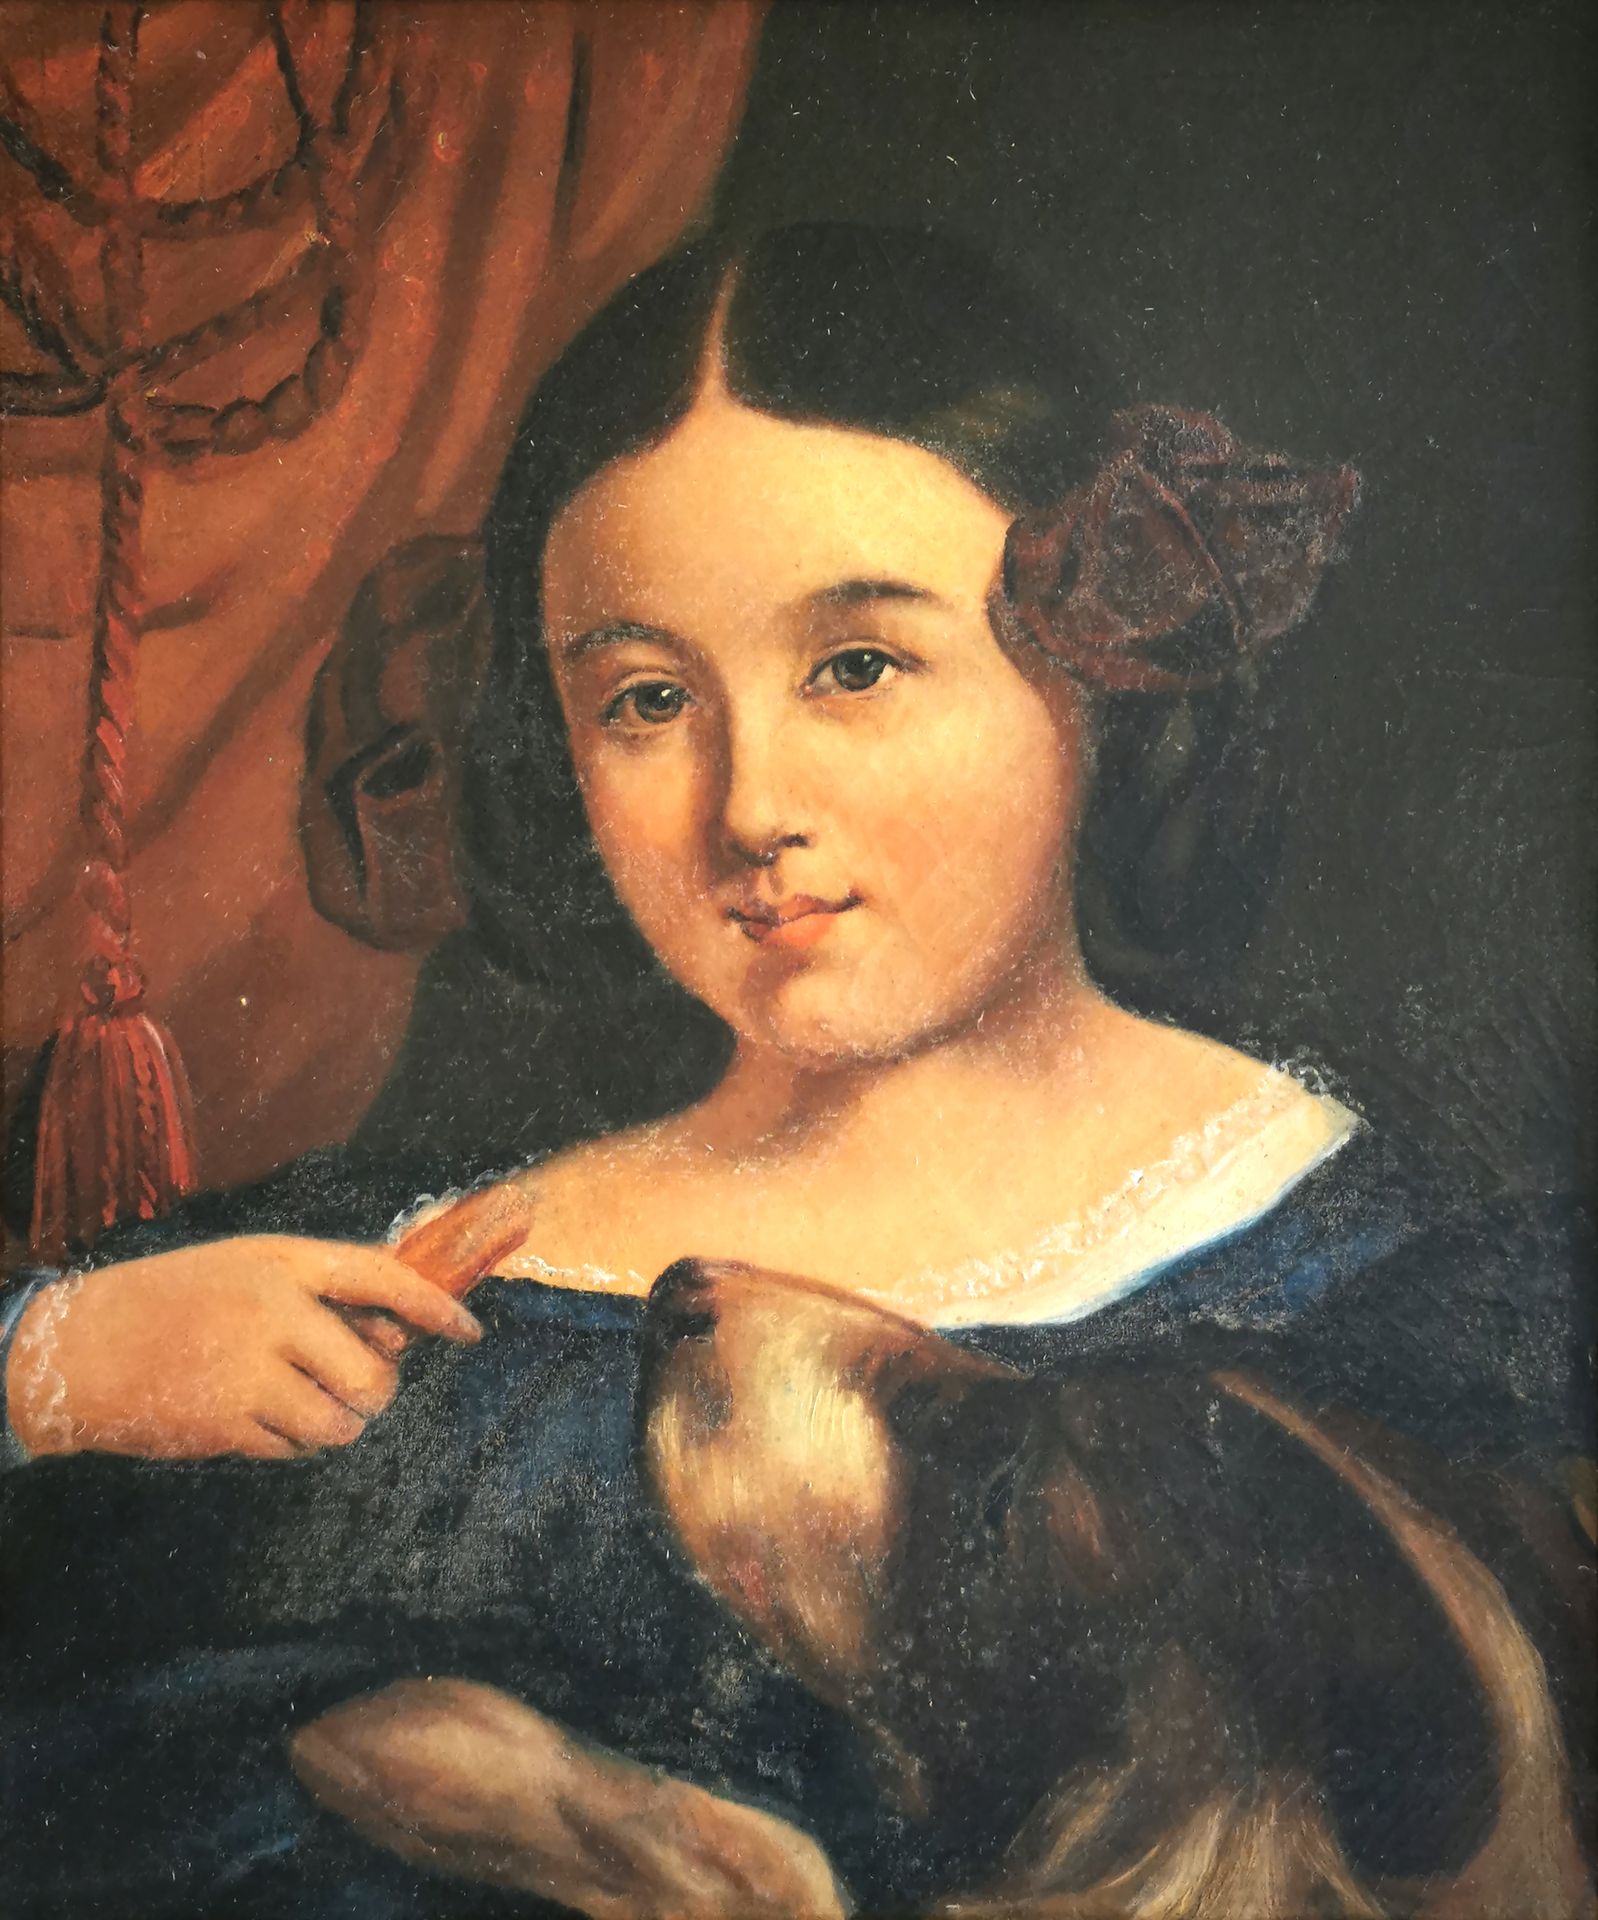 Null 19th century school

Young girl with a dog

Oil on canvas 

46,5 x 38 cm

F&hellip;